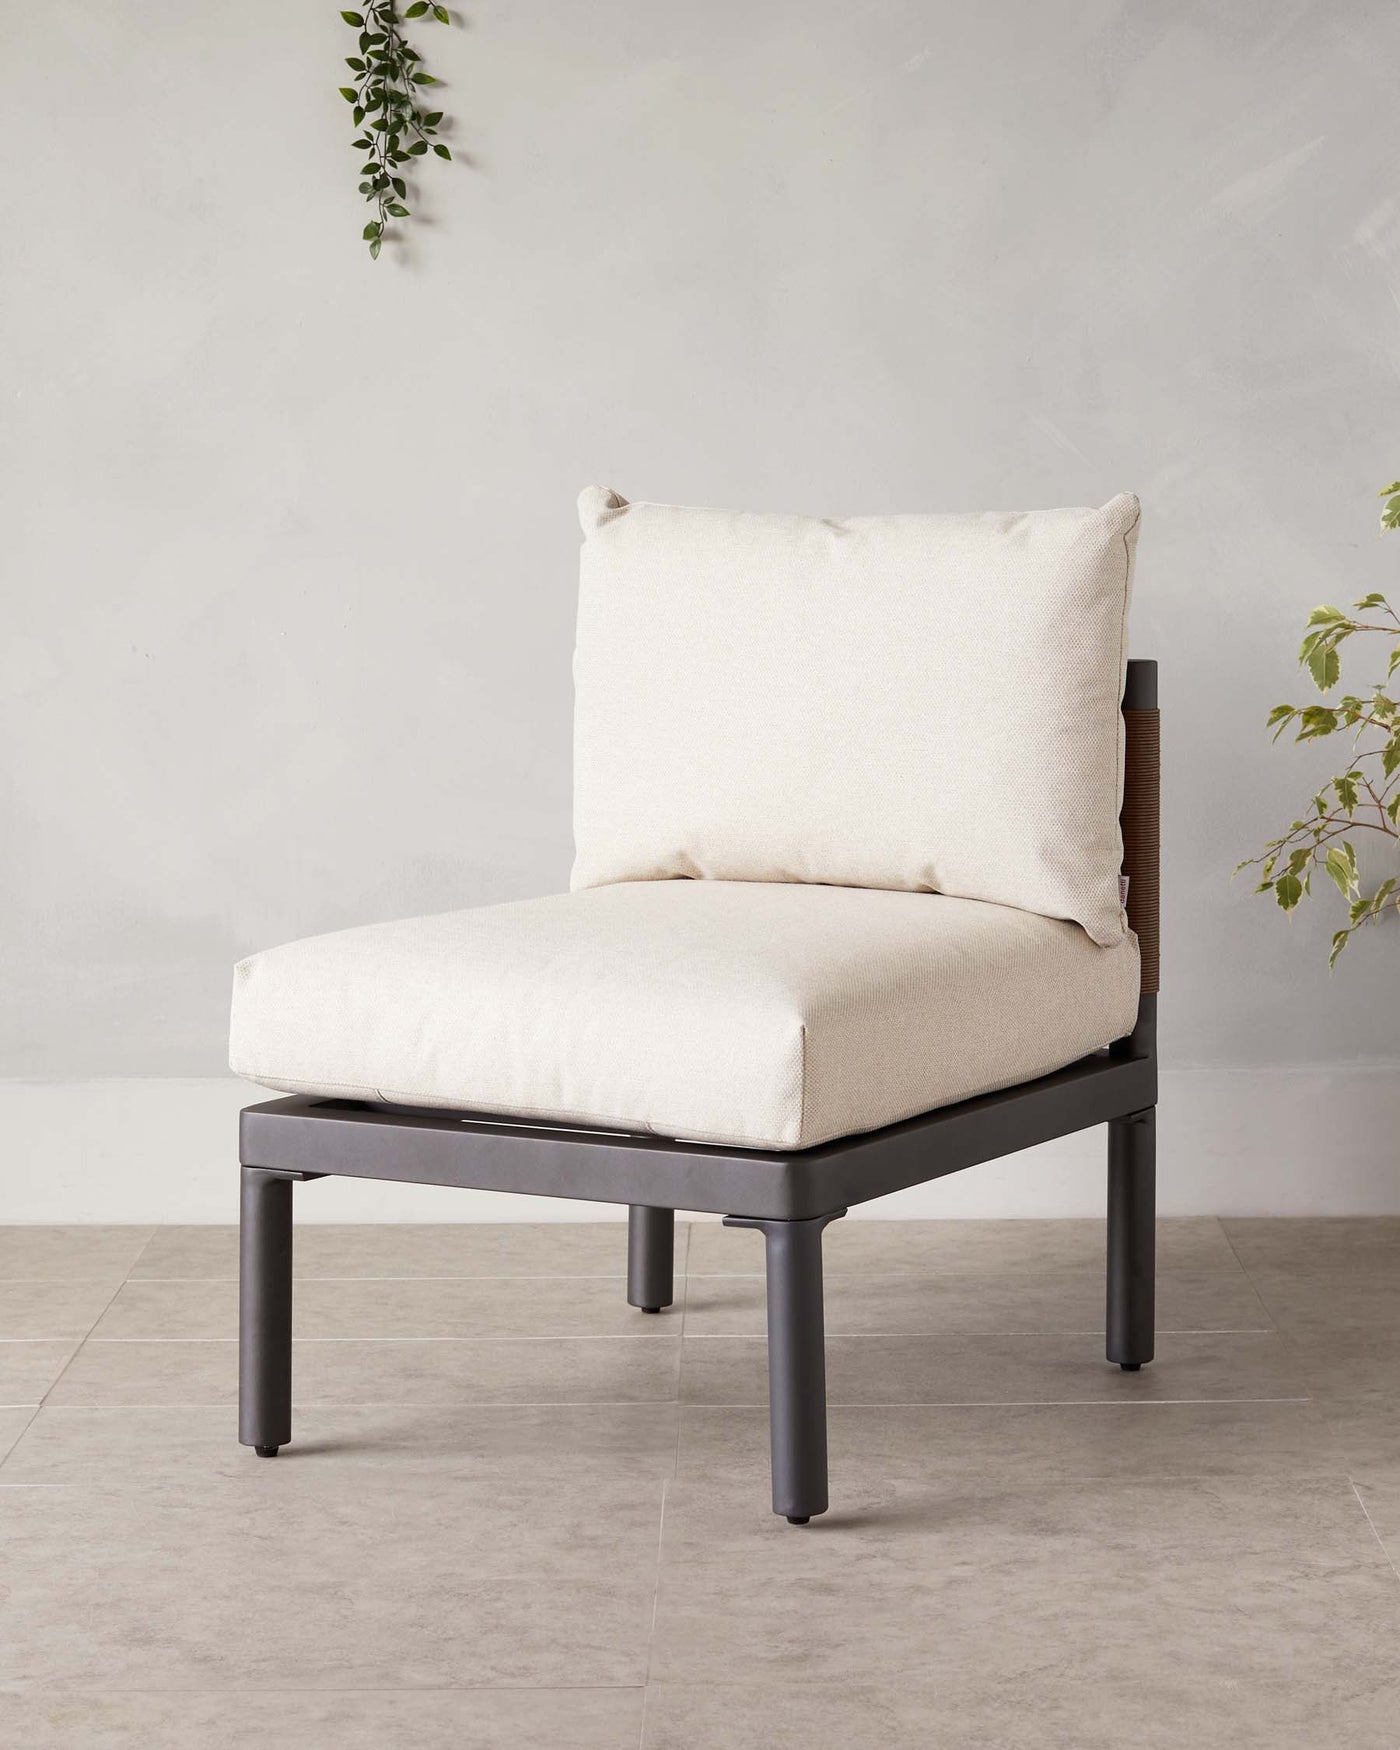 Modern minimalist armless lounge chair with a black wooden frame and off-white upholstered cushions, accompanied by a single square throw pillow on a neutral toned background with a hint of greenery.